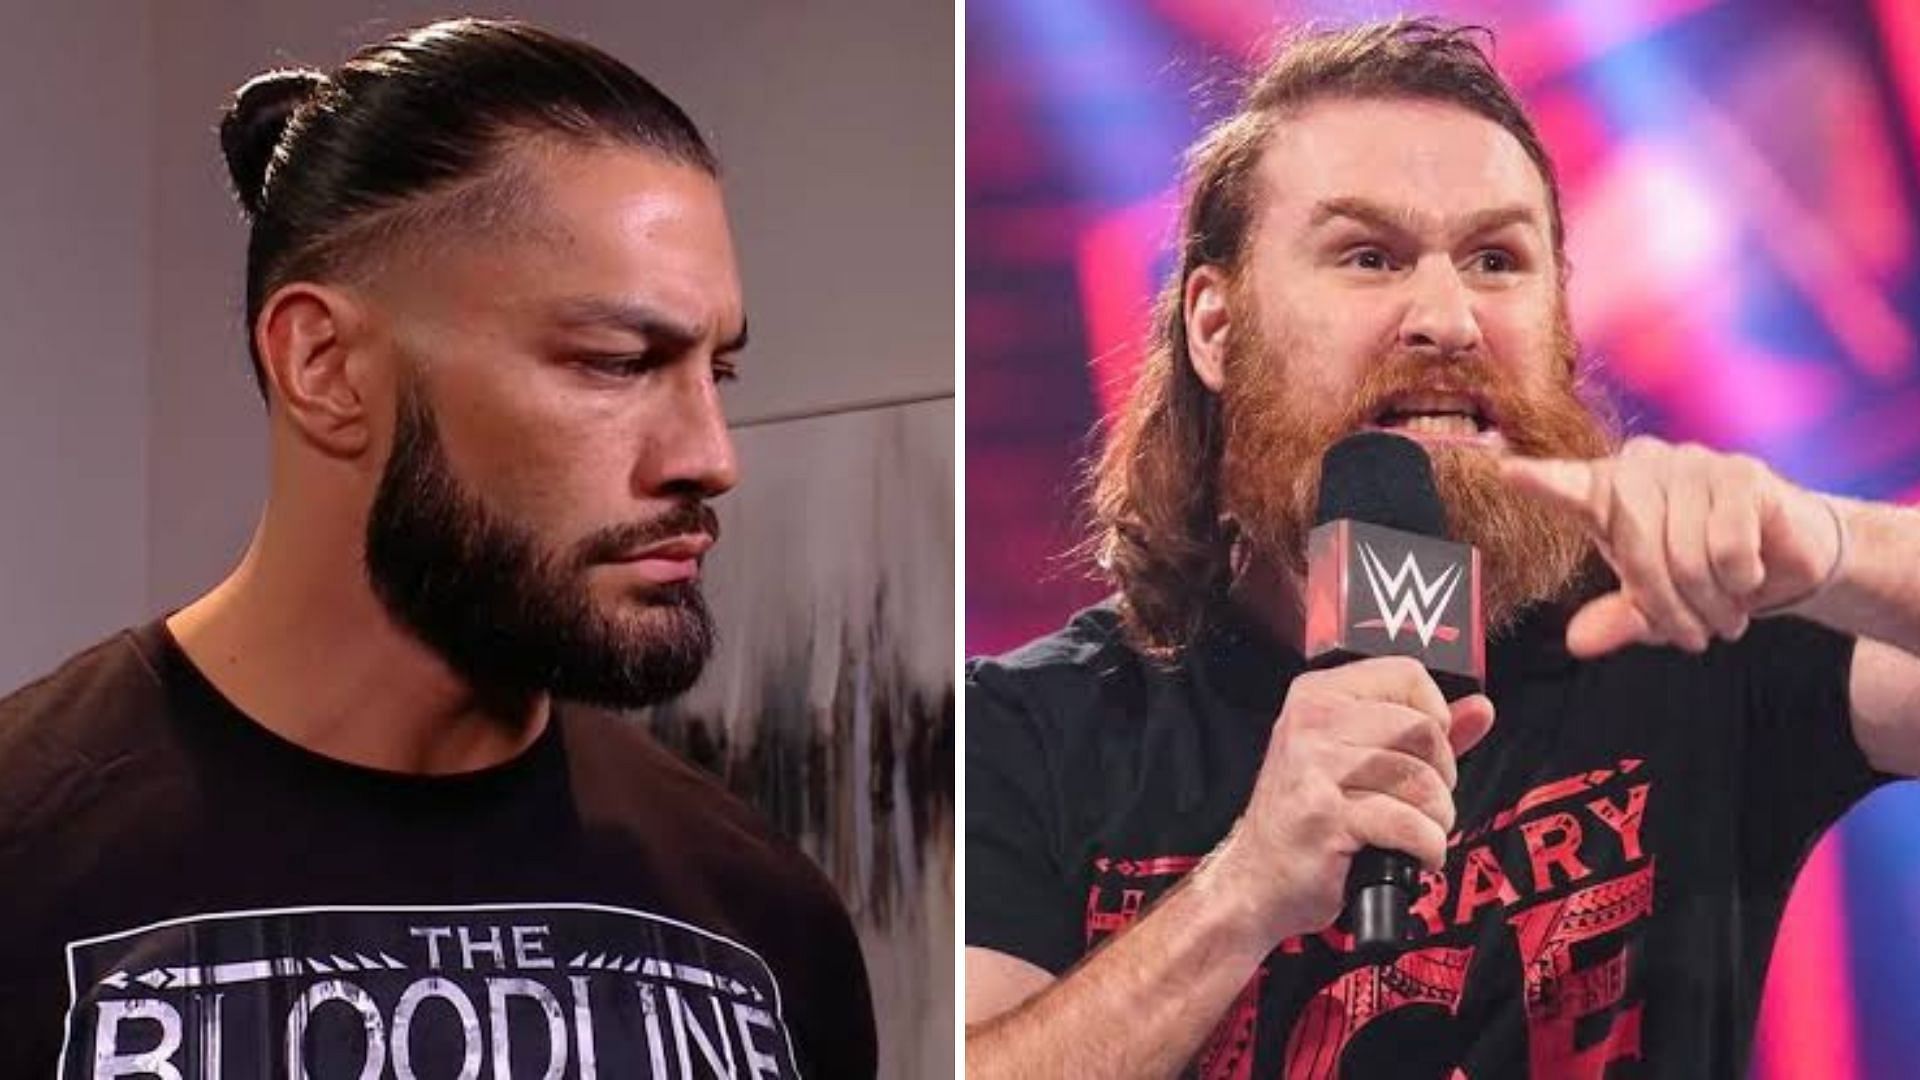 Roman Reigns and Sami Zayn are two of WWE